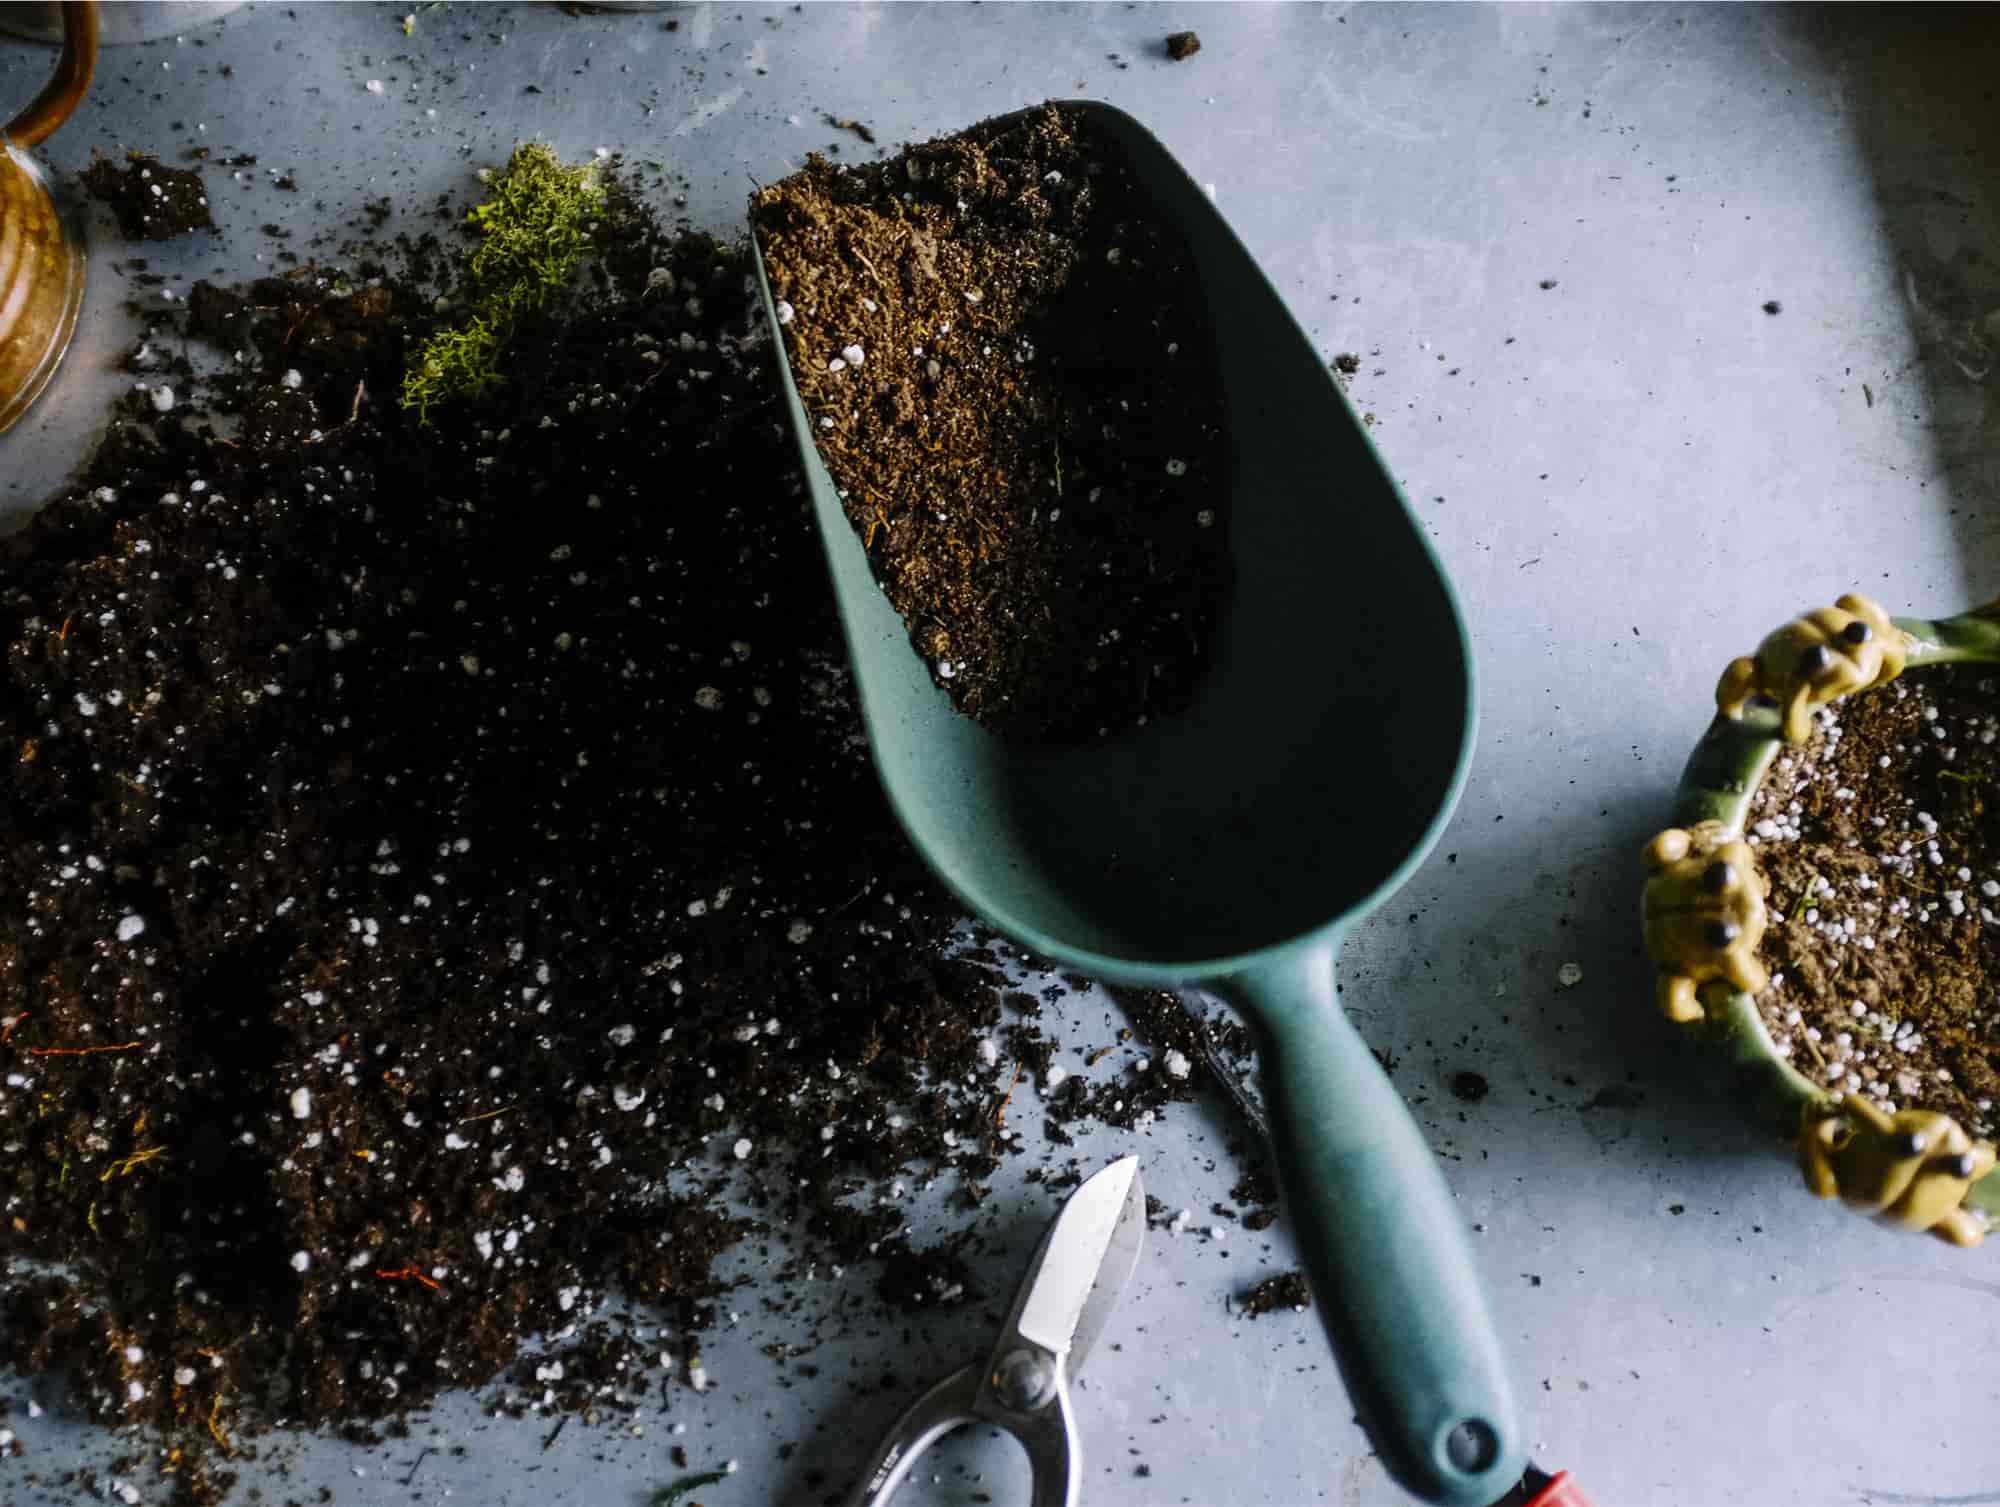 Composting With Coffee Grounds